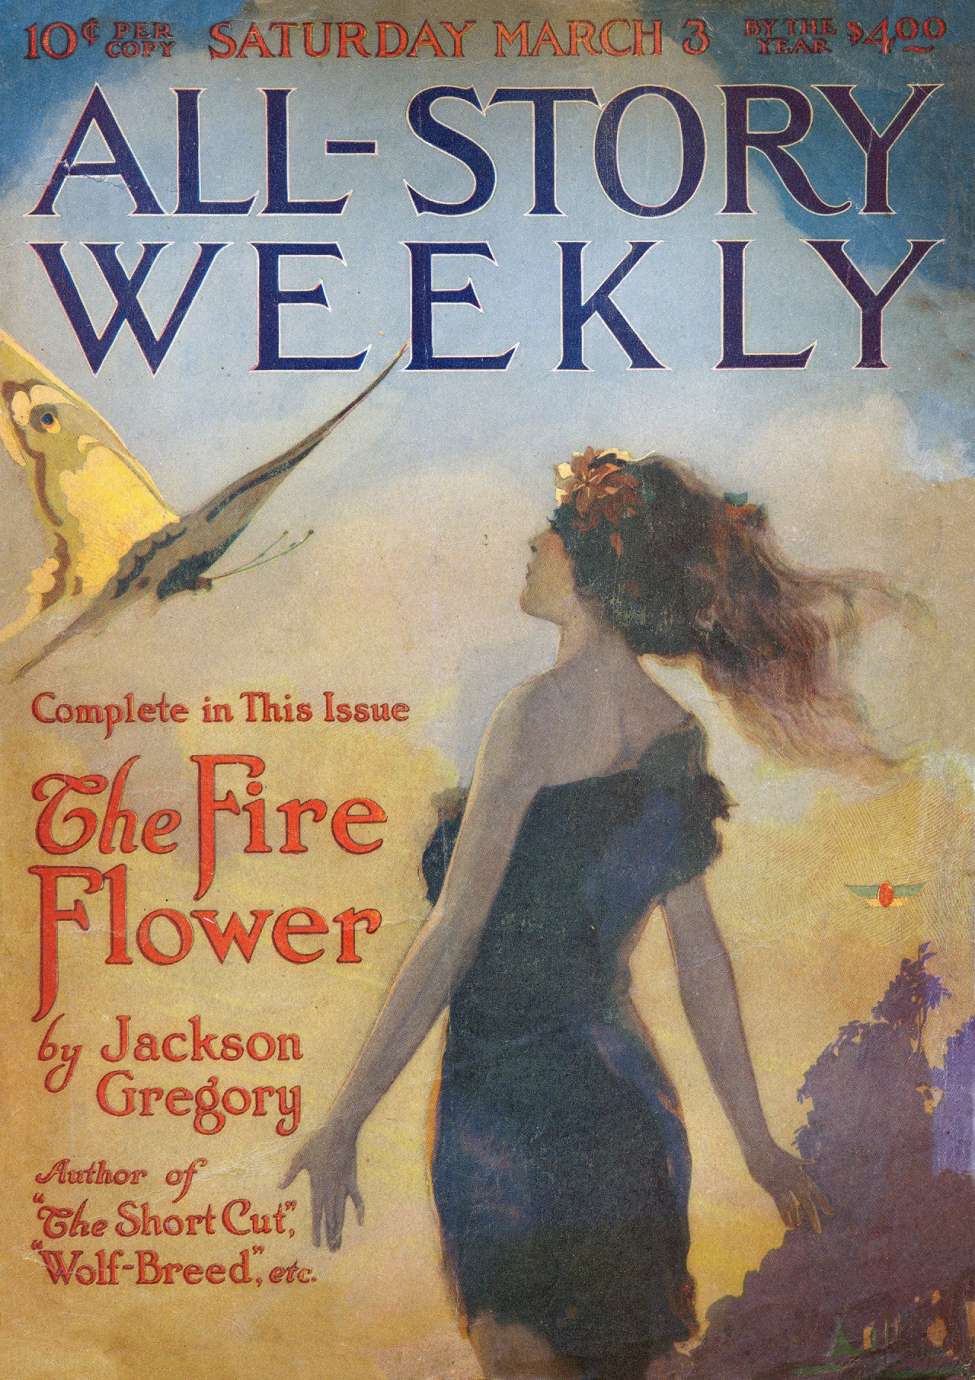 Comic Book Cover For All-Story Weekly v68 3